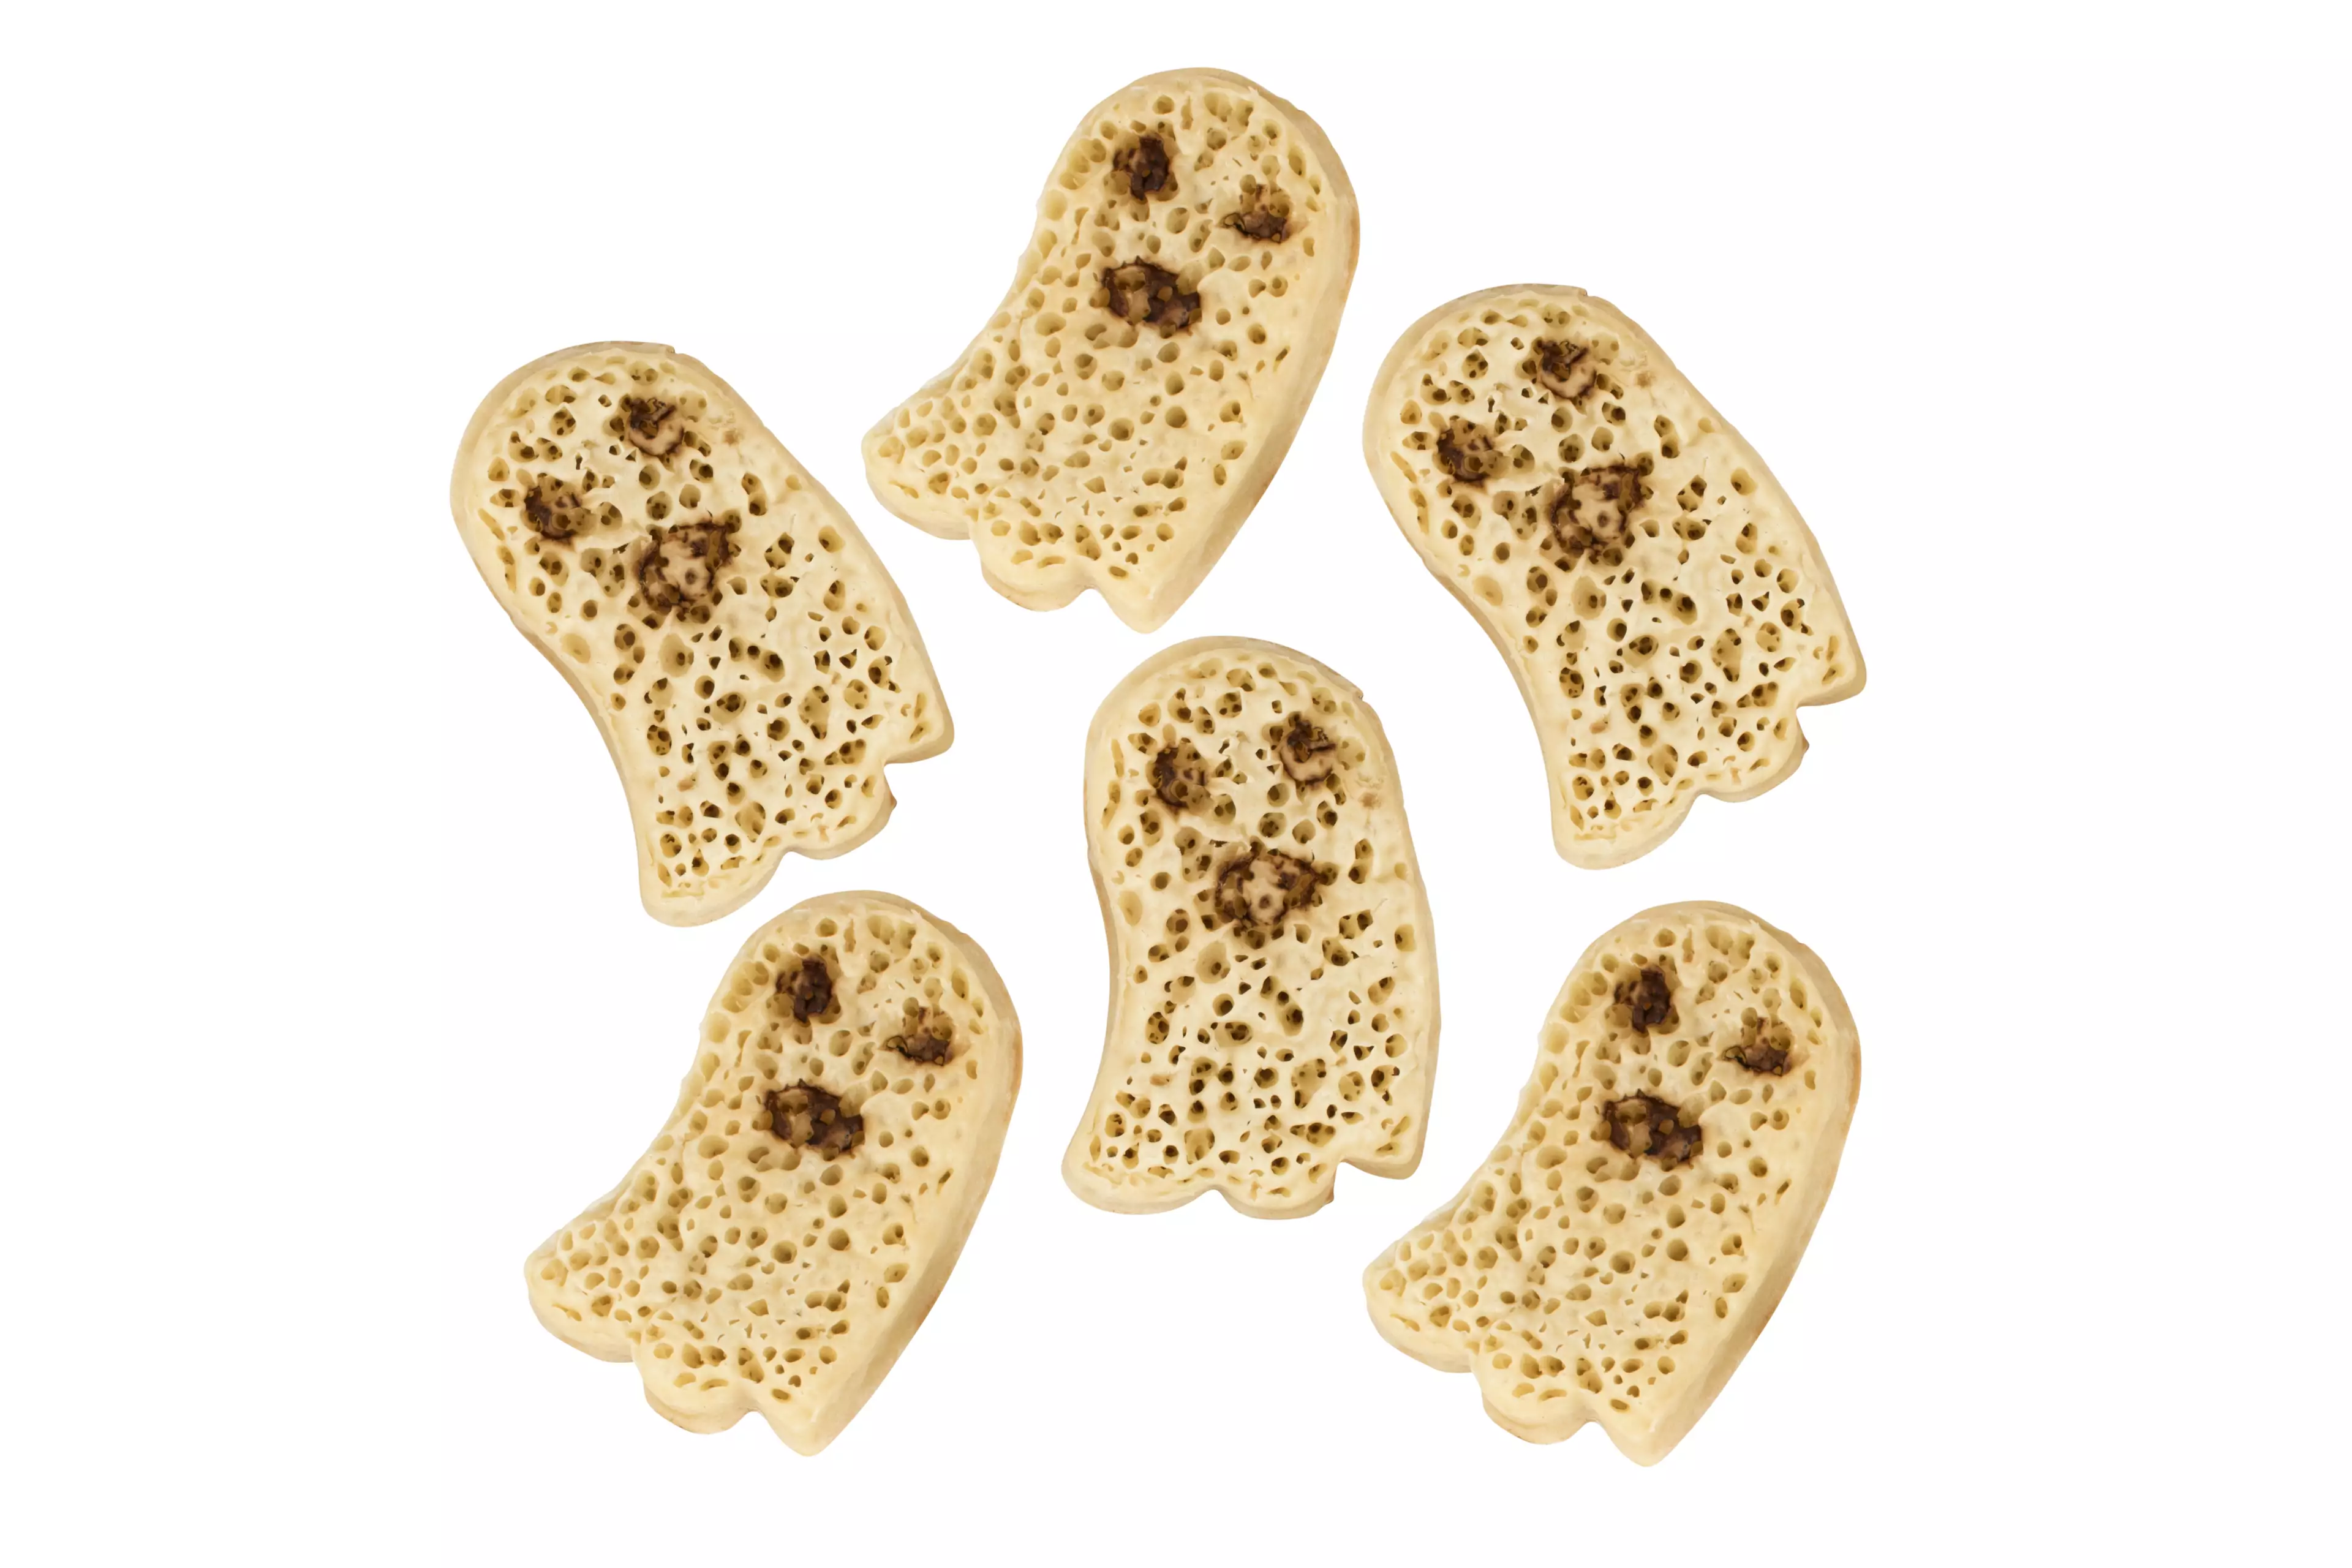 The ASDA crumpets are shaped like ghouls (